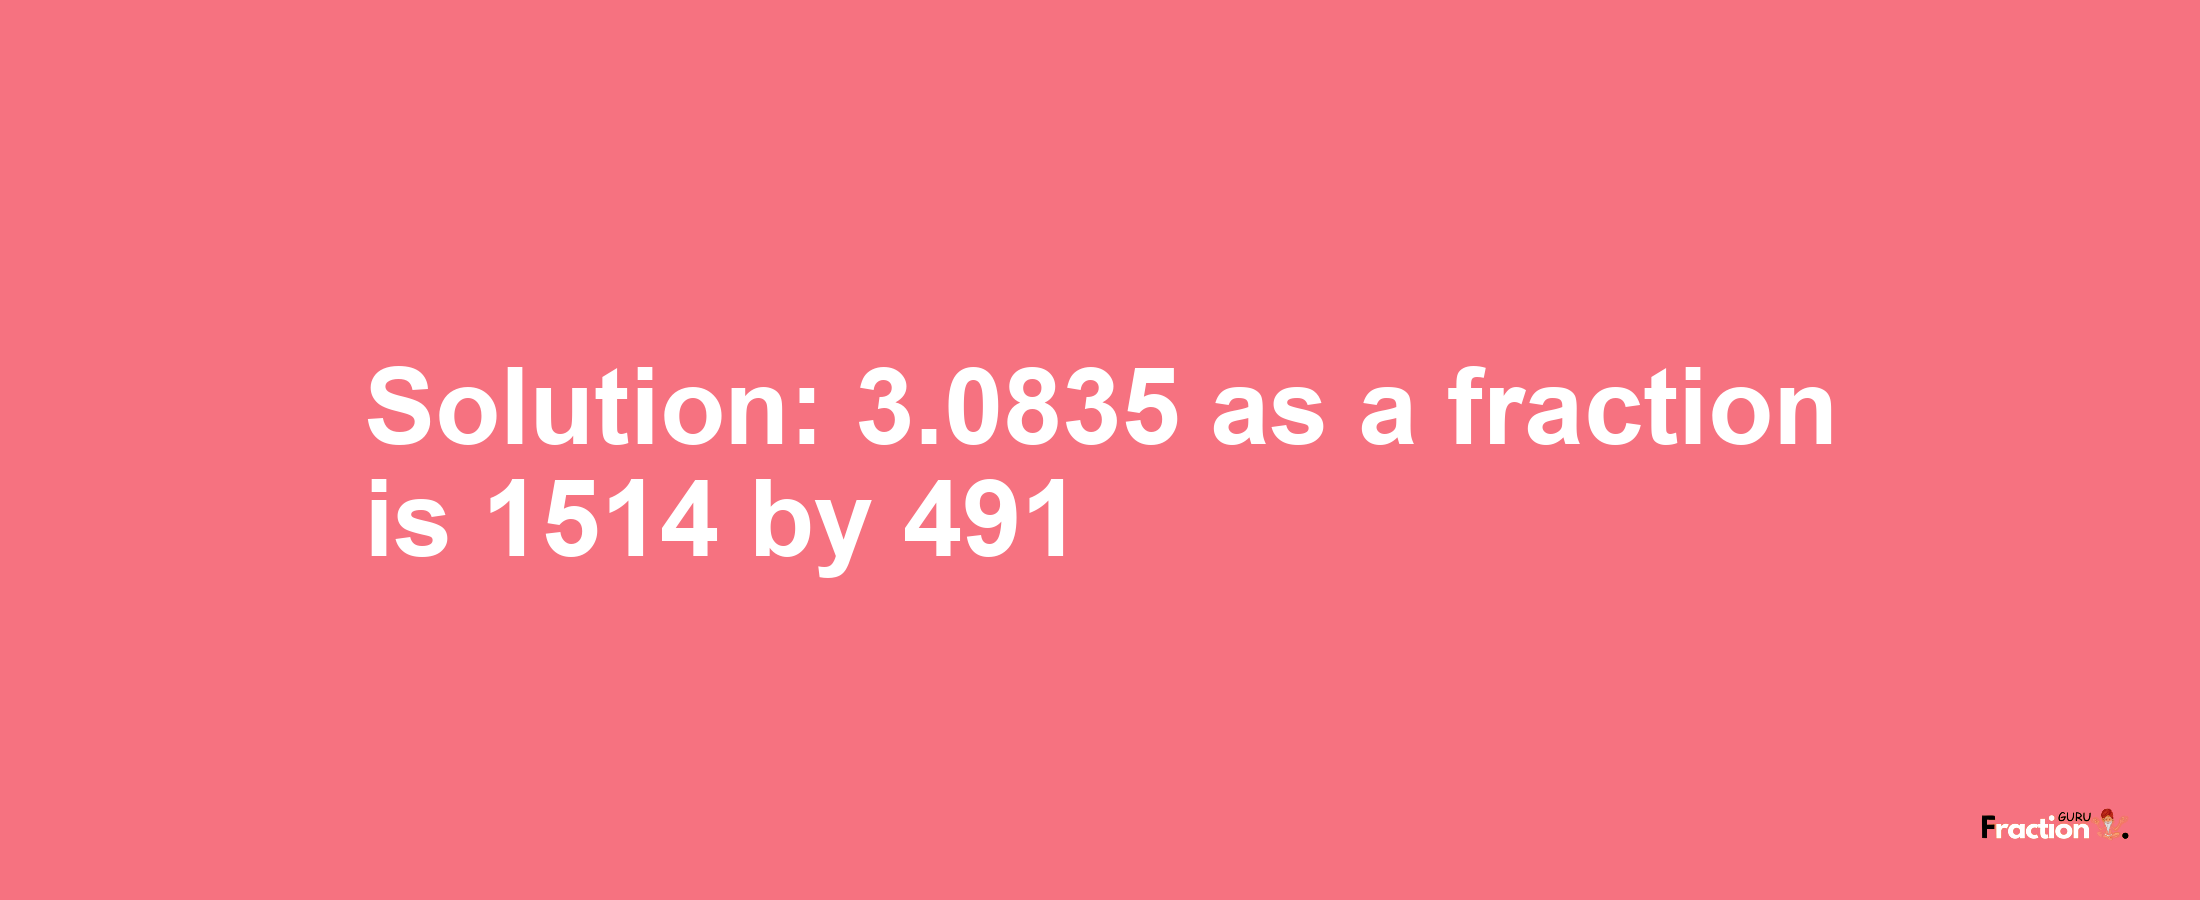 Solution:3.0835 as a fraction is 1514/491